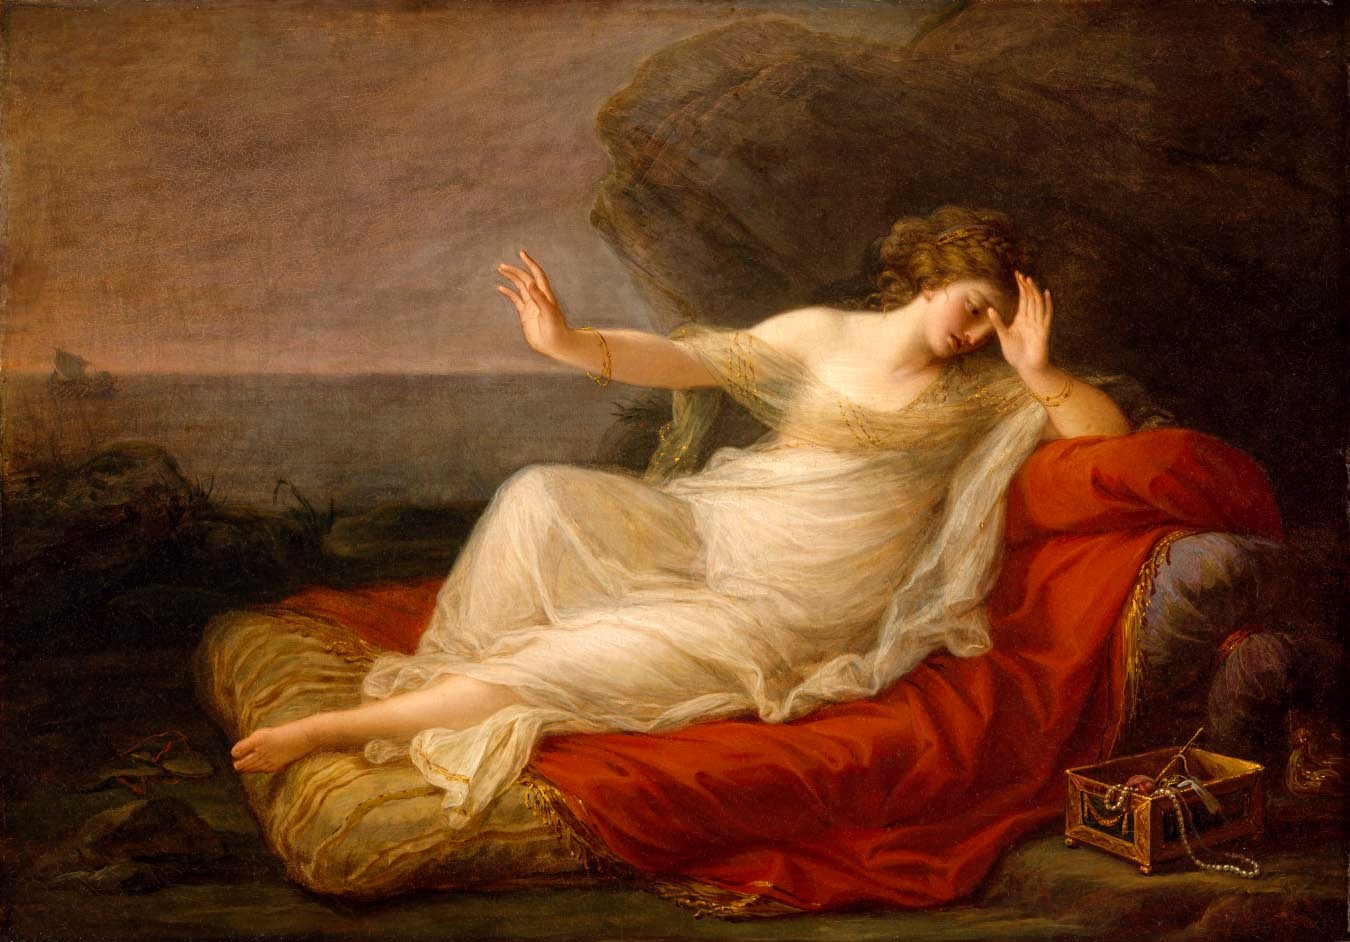 Angelica Kauffmann, Ariadne Abandoned by Theseus, 1774